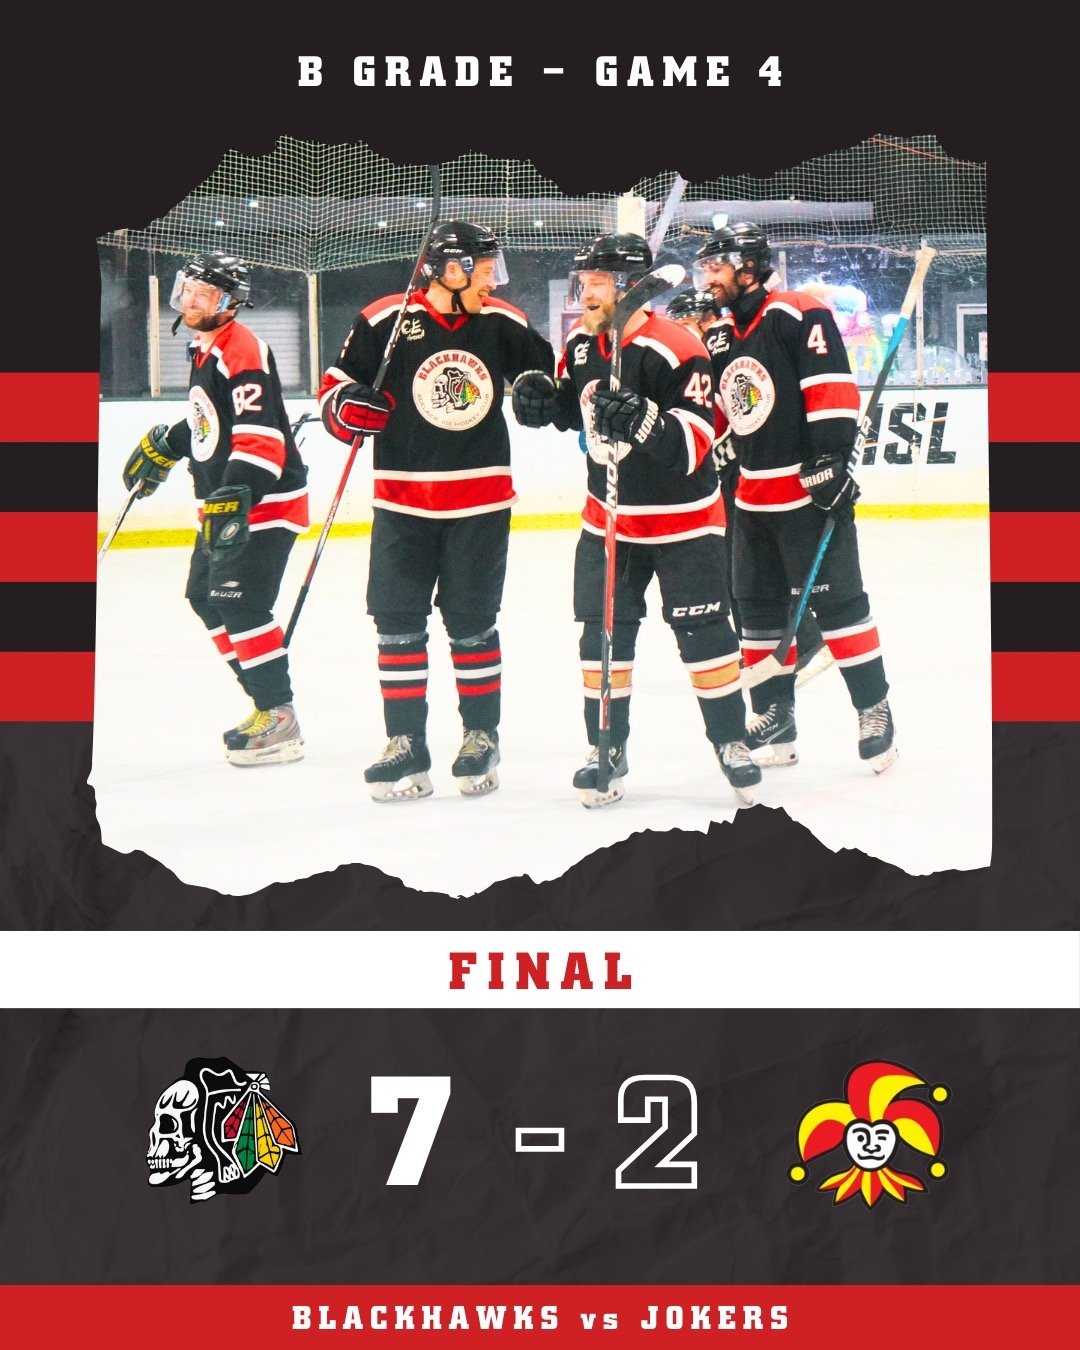 BLACKHAWKS vs JOKERS (B Grade) IHSA Winter League Game 4 &hearts;️7 - 2 💚 WIN! Shout to @oibrodiejulian on a hat-trick, Mark Page scoring 2 goals with @mbenharris and Josh Weber taking the team to final score of 7! 🔥Well played to all 👏